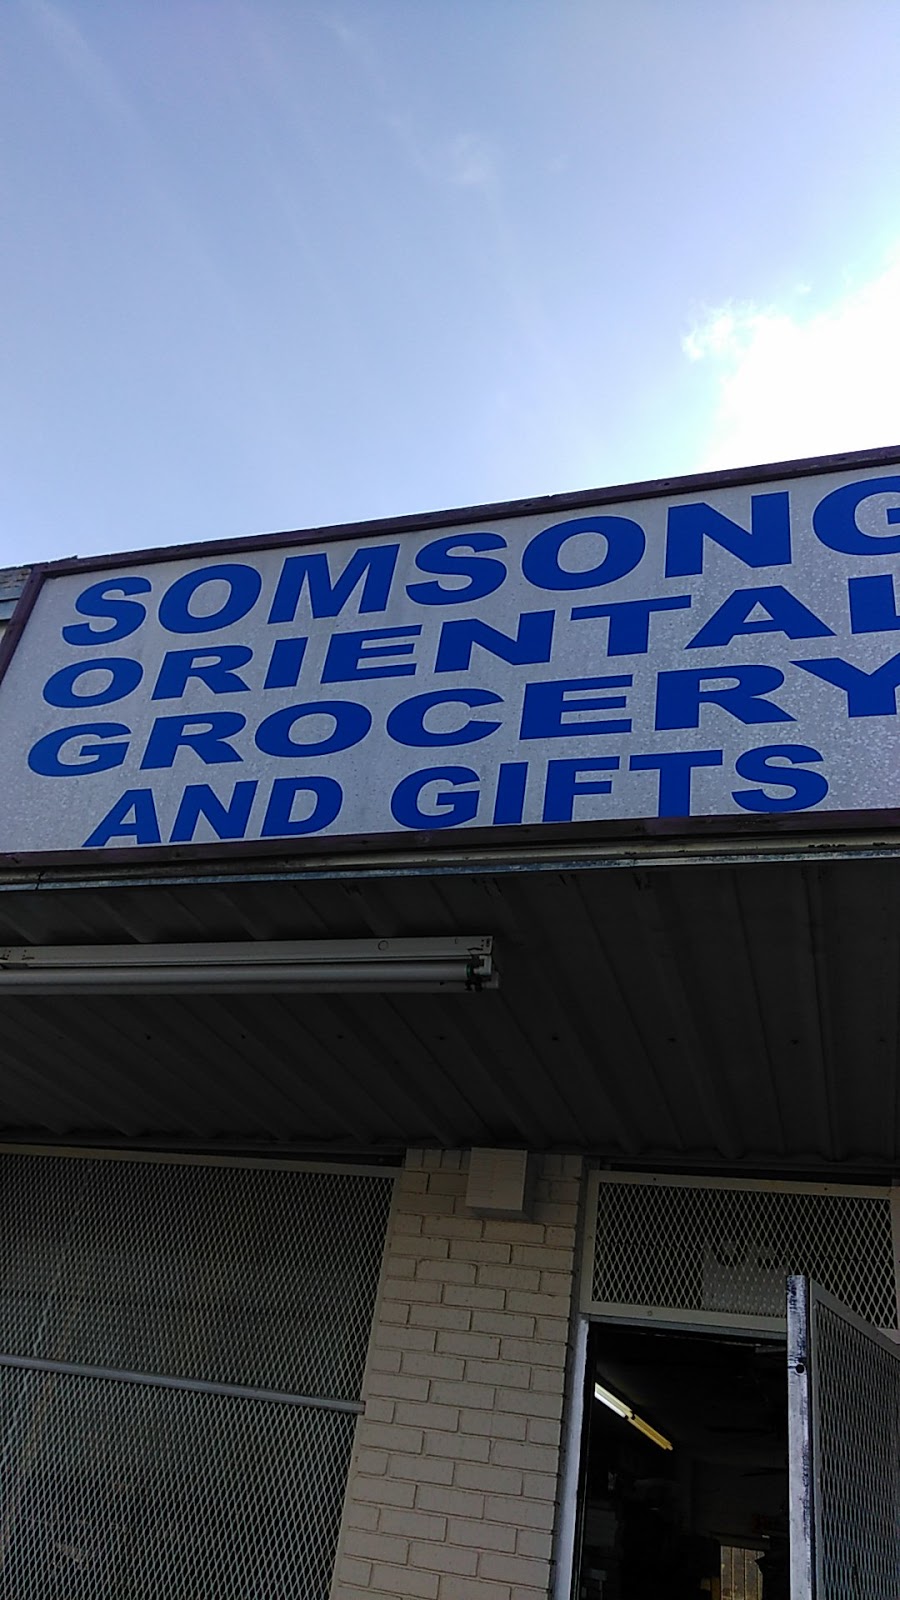 Somsong Oriental Foods & Gifts | 5030 W Military Dr, San Antonio, TX 78242 | Phone: (210) 674-1007